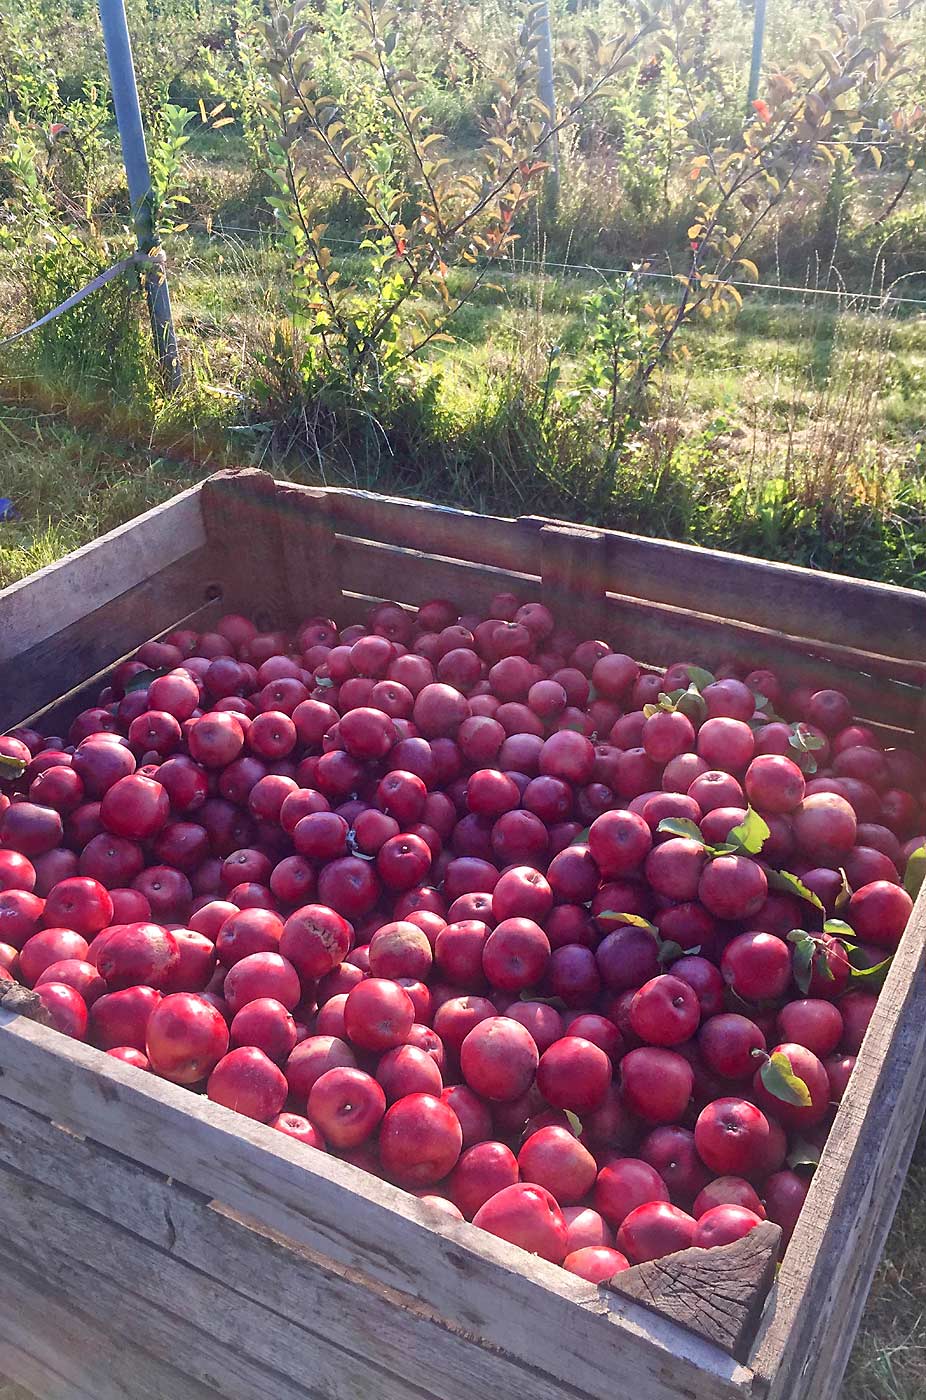 The 2018 Otterson harvest at Michigan State University’s Clarksville Research Center. Steve van Nocker planted Otterson trees at the center after learning the apple has good size and color for commercial apple harvest. (Courtesy Steve van Nocker/Michigan State University)